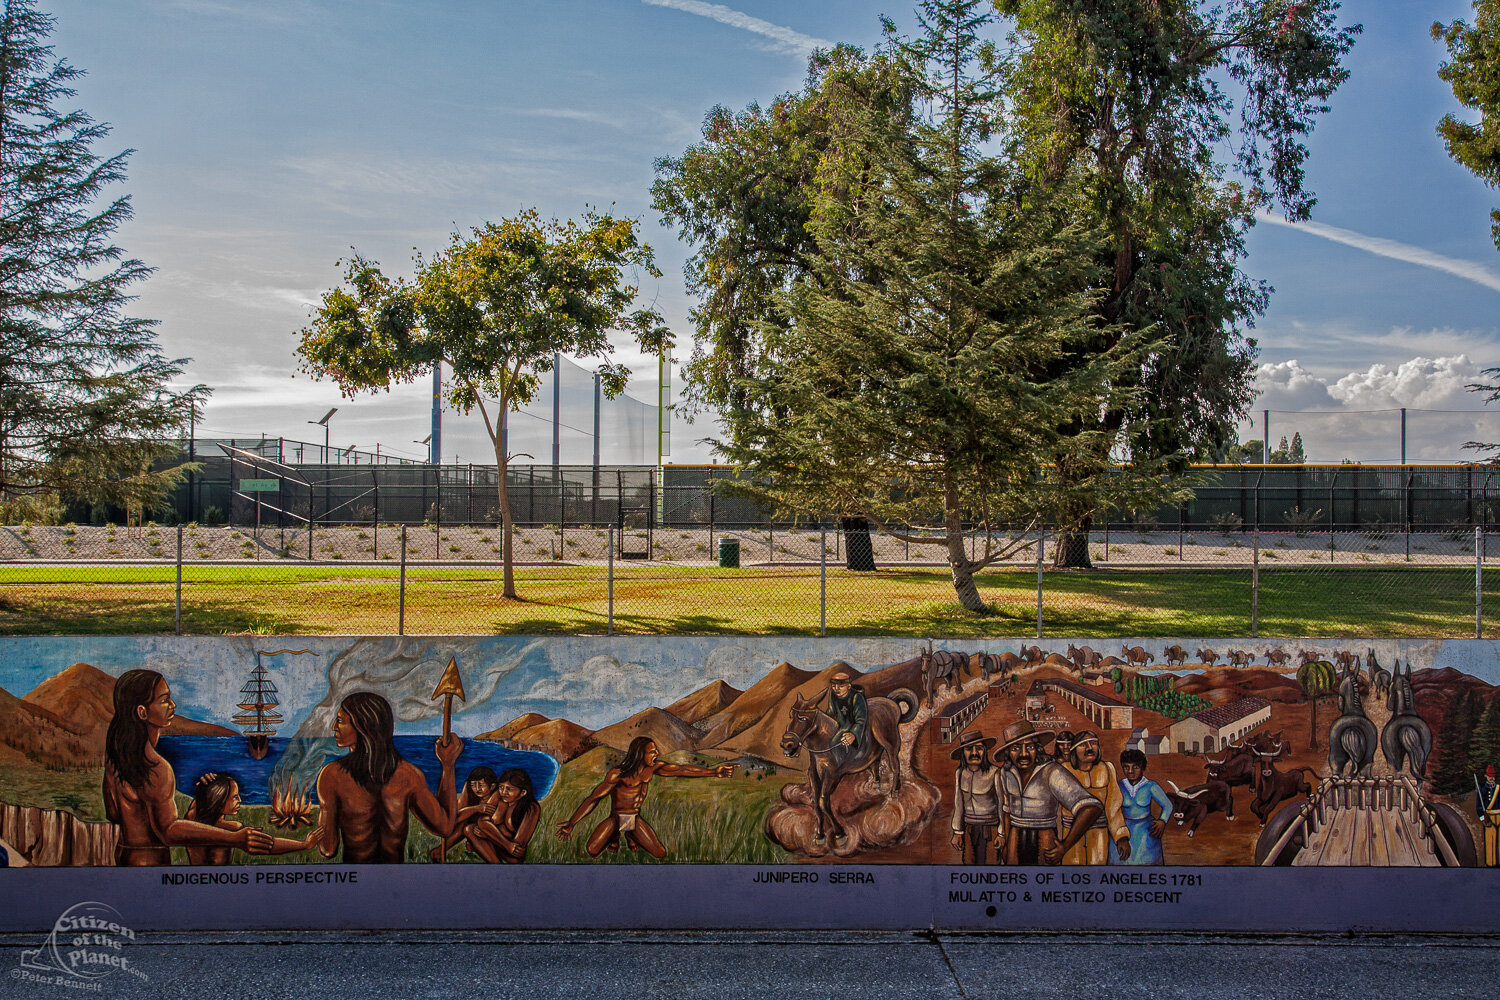  The Great Wall of Los Angeles depicts the history of California as seen through the eyes of women and minorities. The mural, located along the Tujunga Wash, is designed by Judith Baca and executed with the help of over 400 community youth and artist